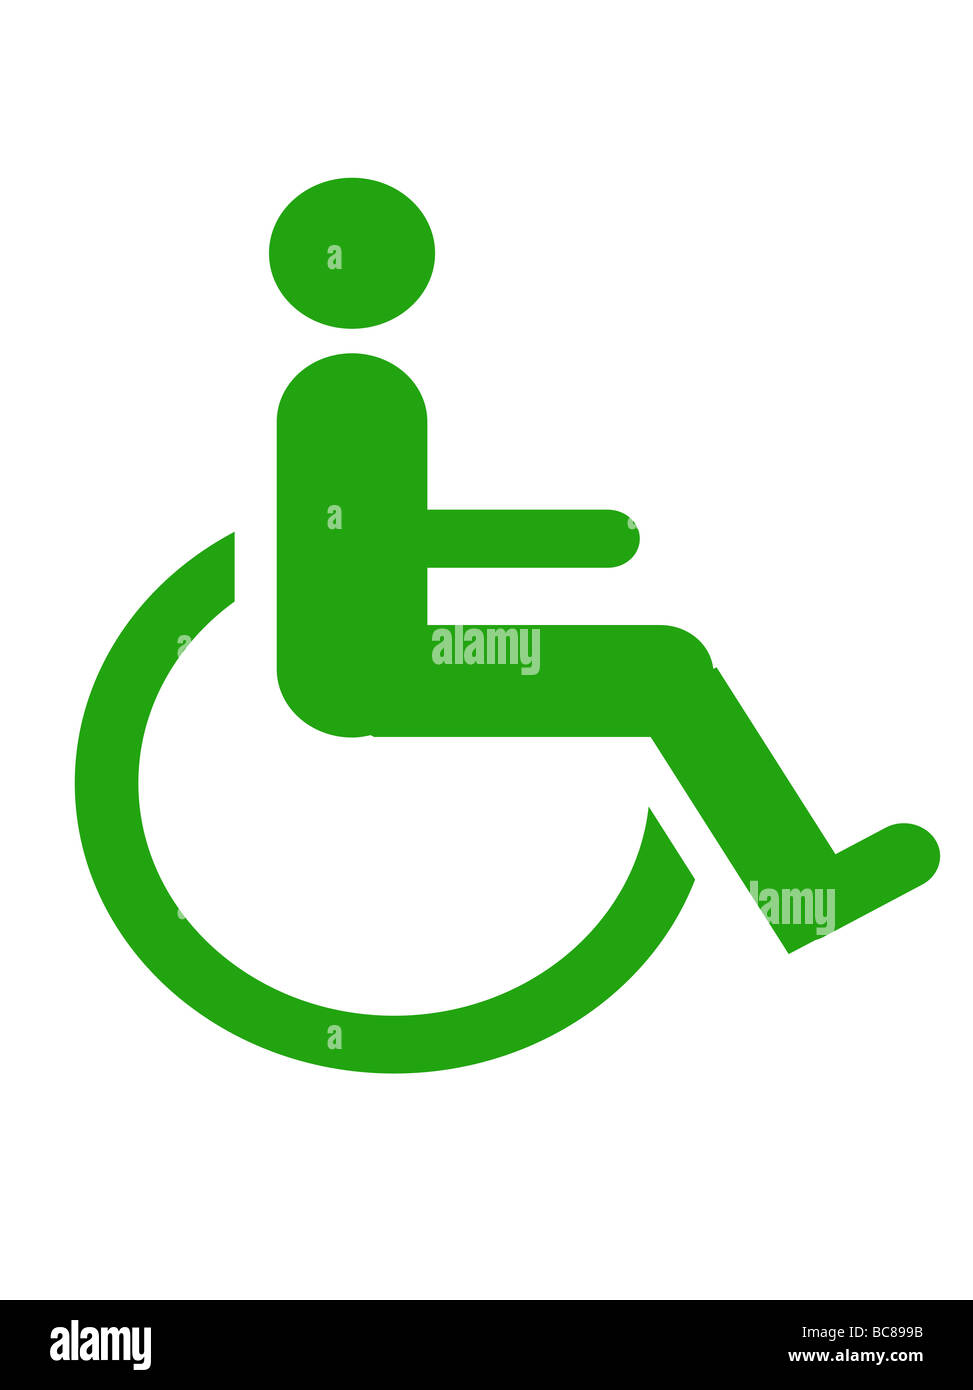 Green disabled symbol isolated on white background Stock Photo